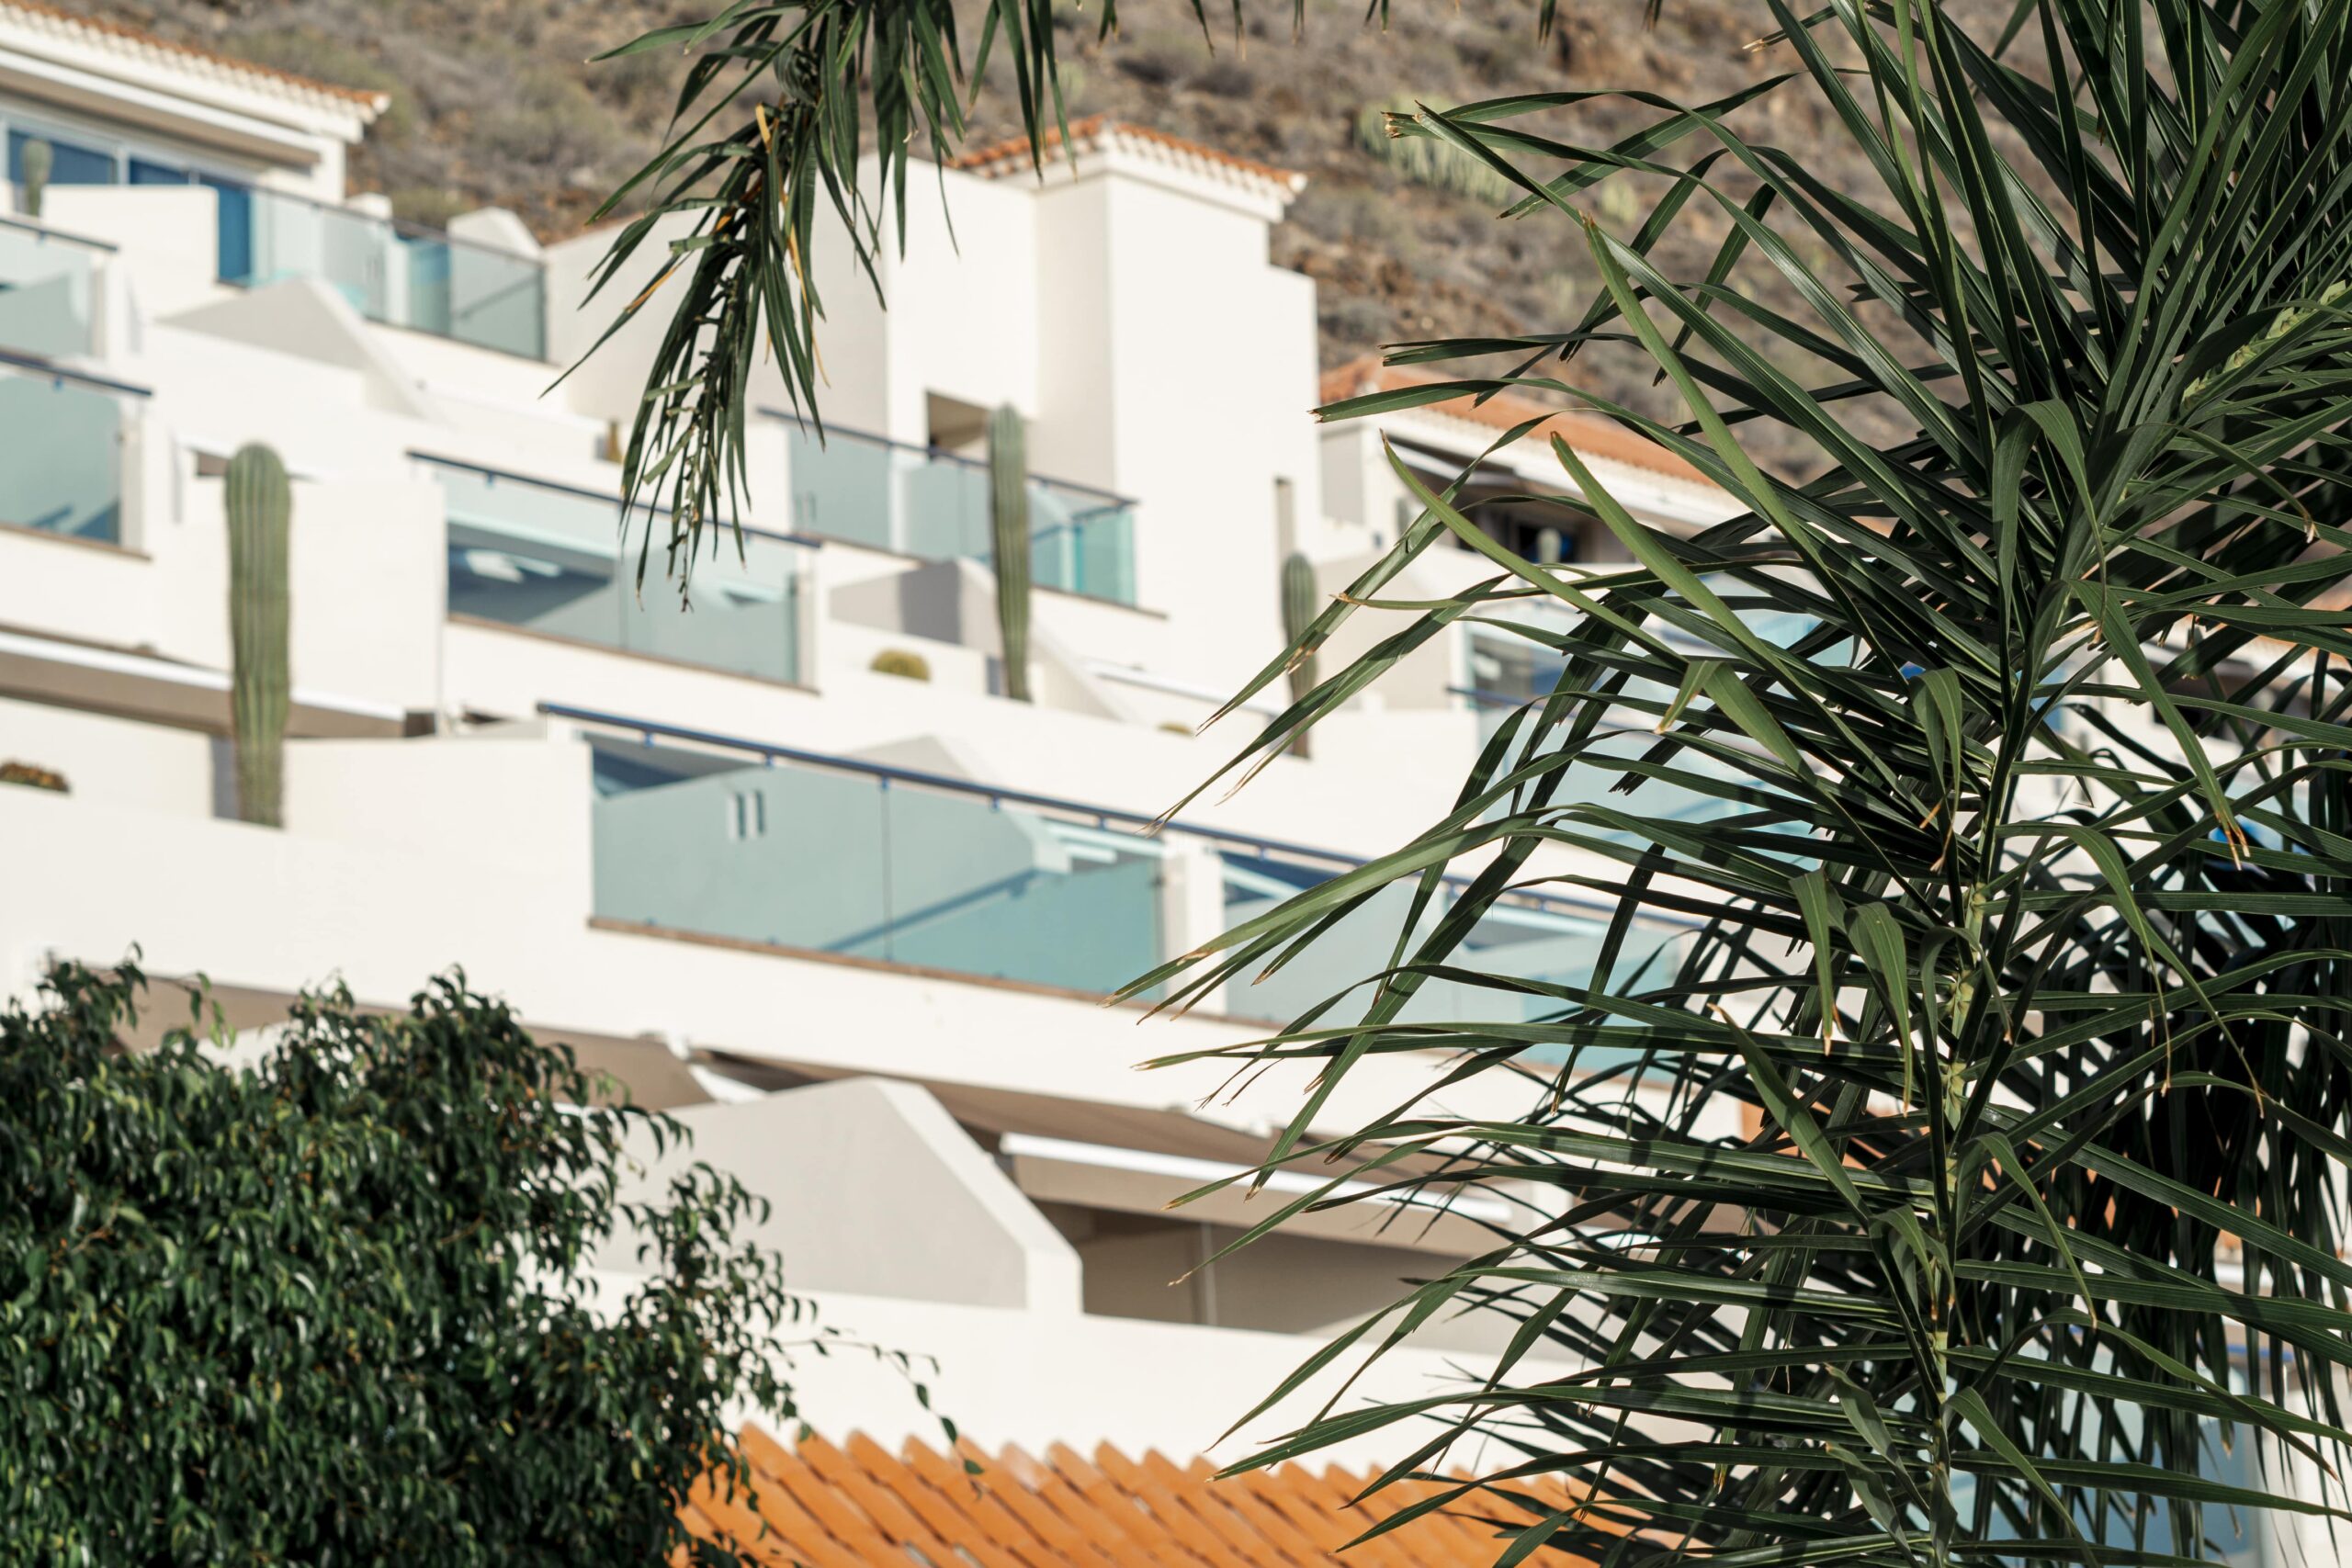 Modern hillside apartments with glass balconies and lush greenery in Cyprus.